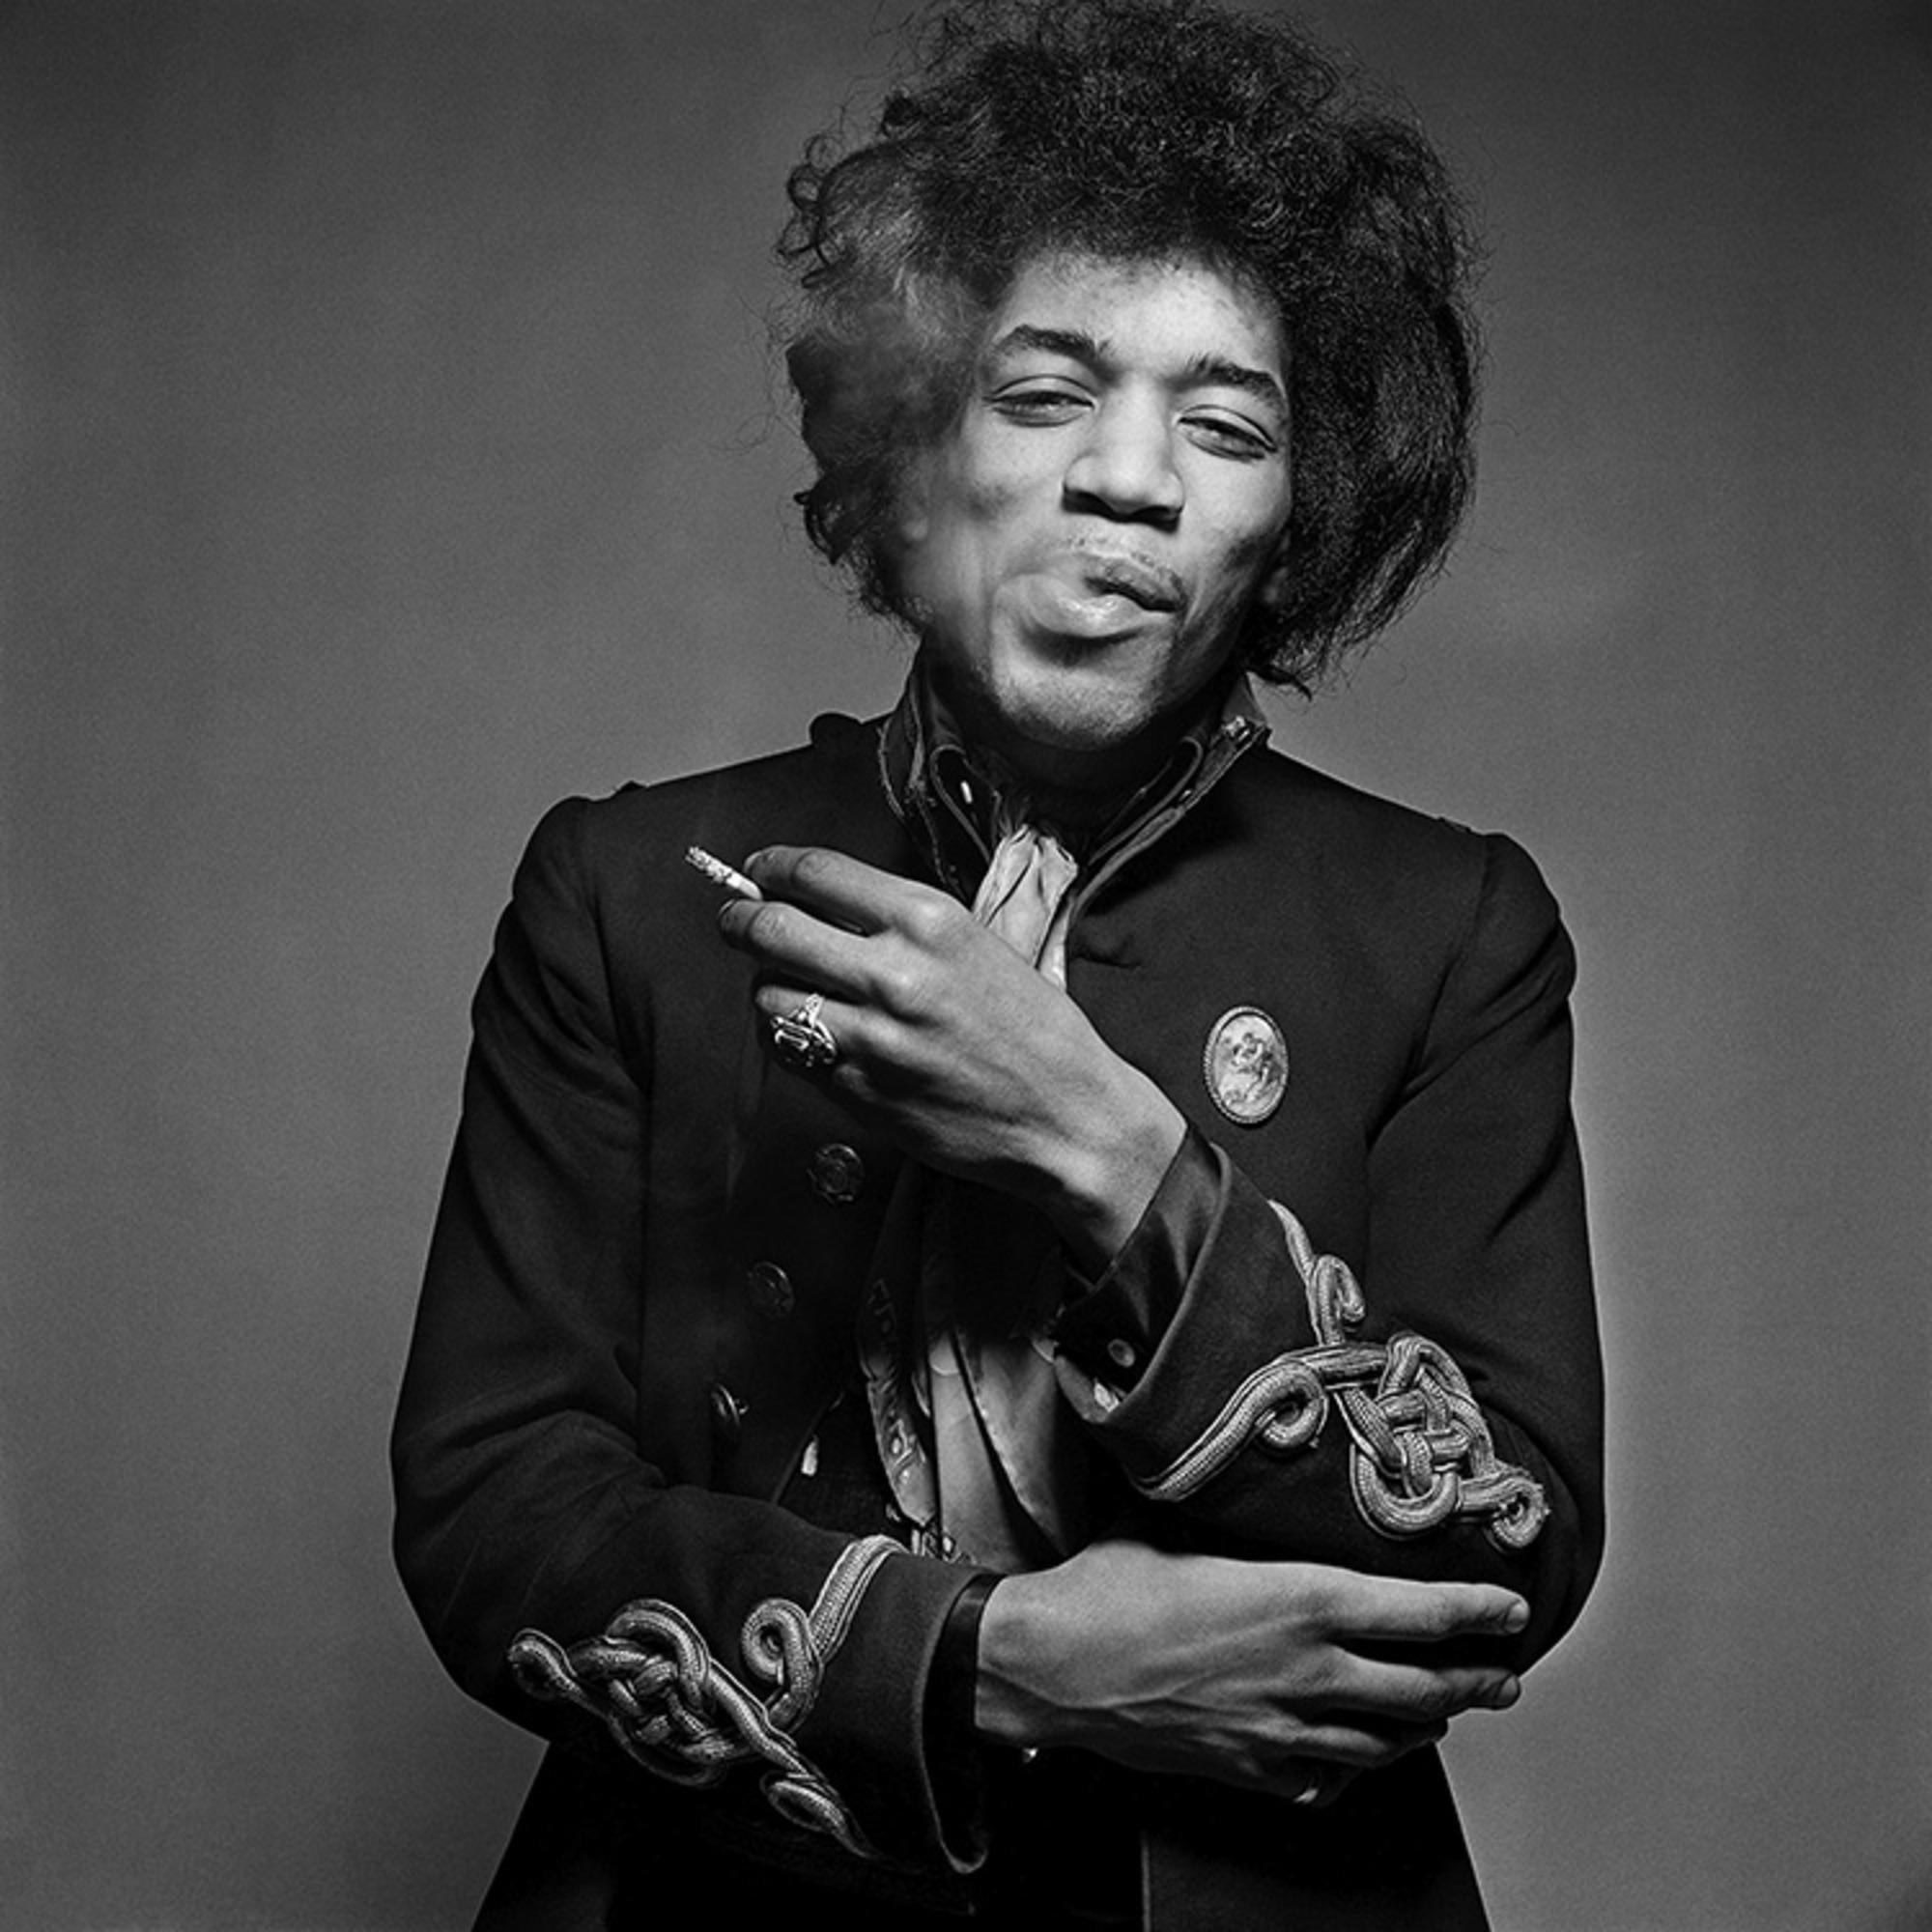 Gelatin-silver, signed and numbered

American rock guitarist, singer, and songwriter Jimi Hendrix, photographed in London, 1967.

Edition size 24

This photograph will be printed once payment has been received and will ship directly from the printer